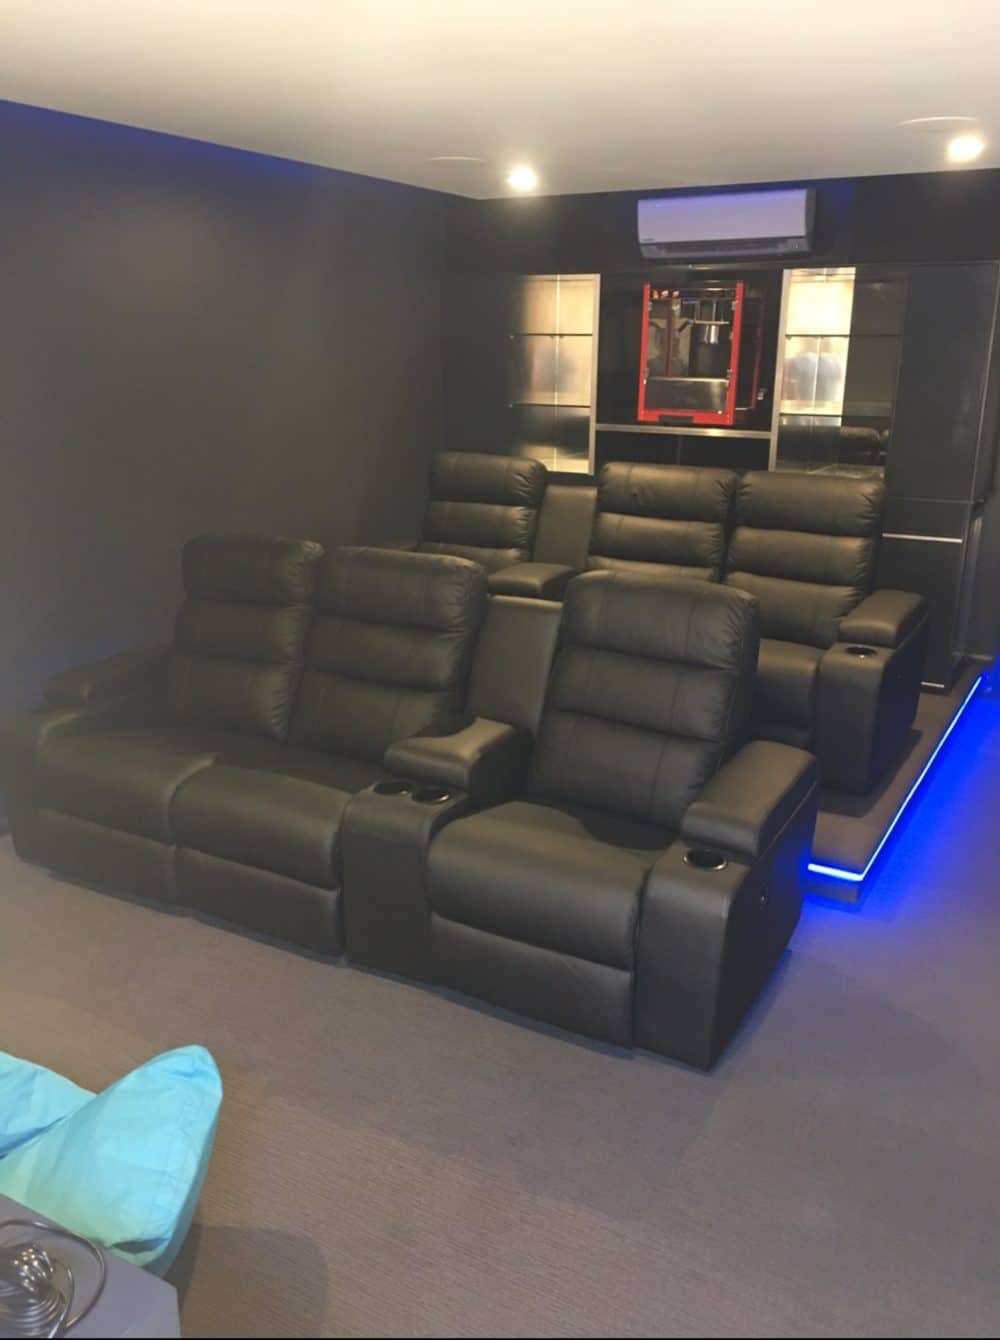 Home Theatre Seating Ht Nova, Leather Theatre Seating For Home